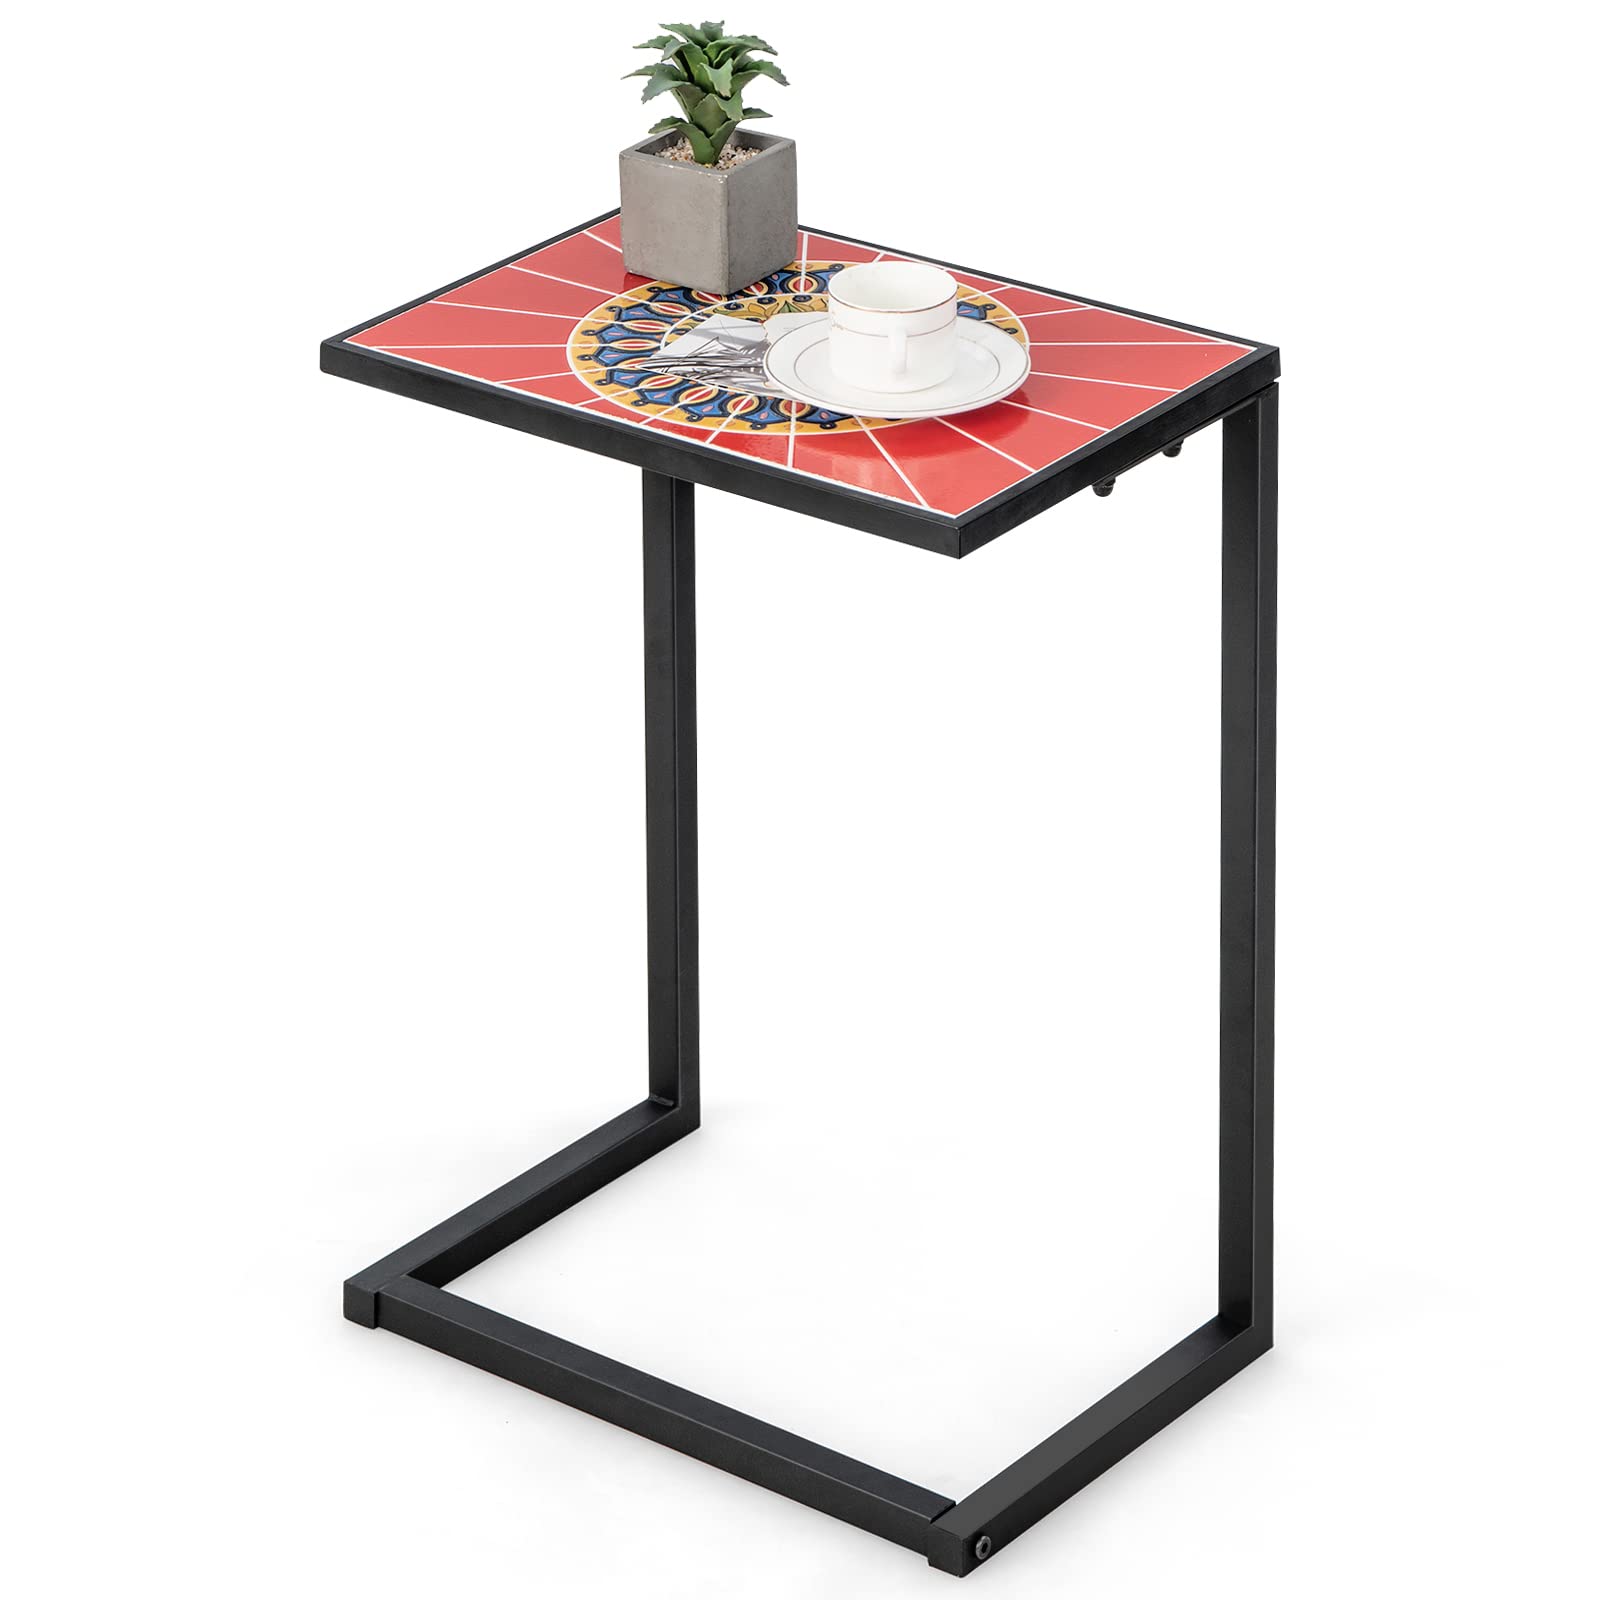 Giantex C-Shaped Outdoor Side Table - Patio End Table w/Ceramic Top & Metal Frame